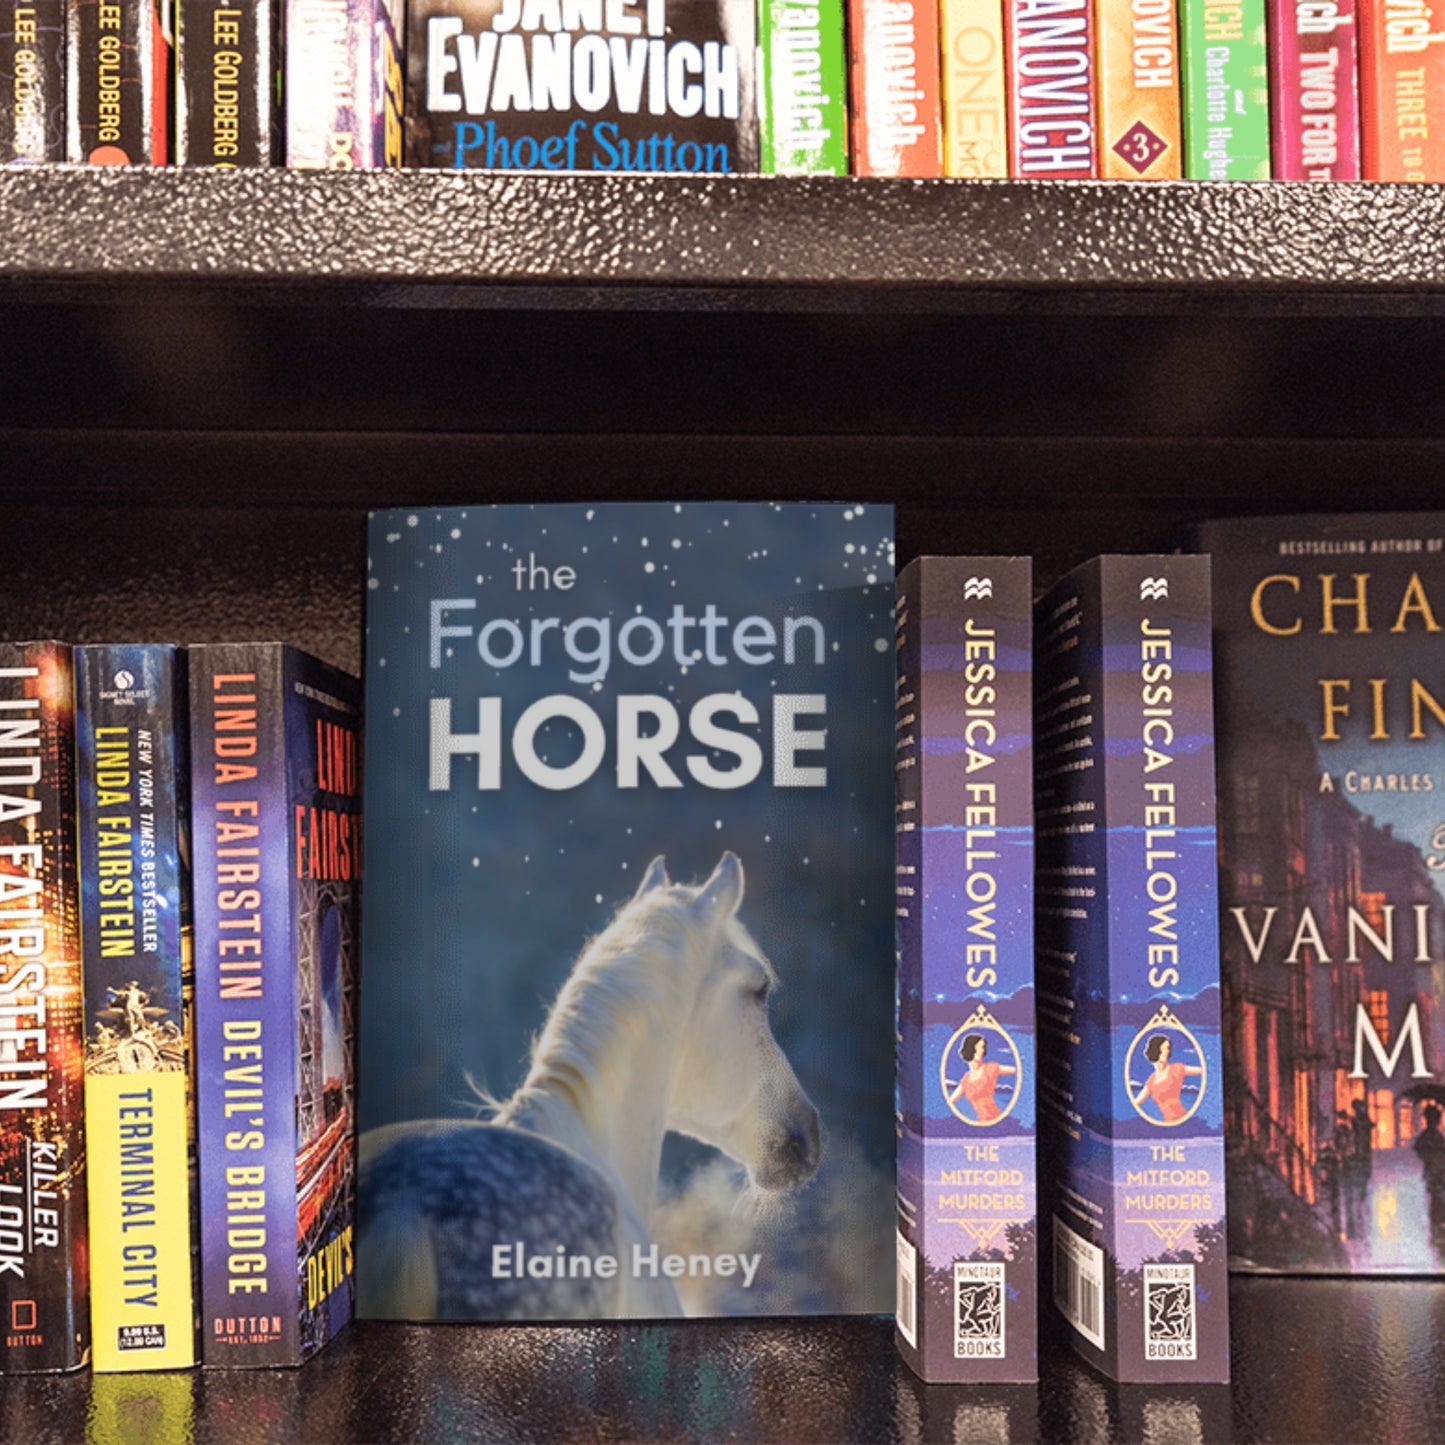 The Forgotten Horse - Book 1 in the Connemara Horse Adventure Series for Kids. The perfect gift for children age 8-12